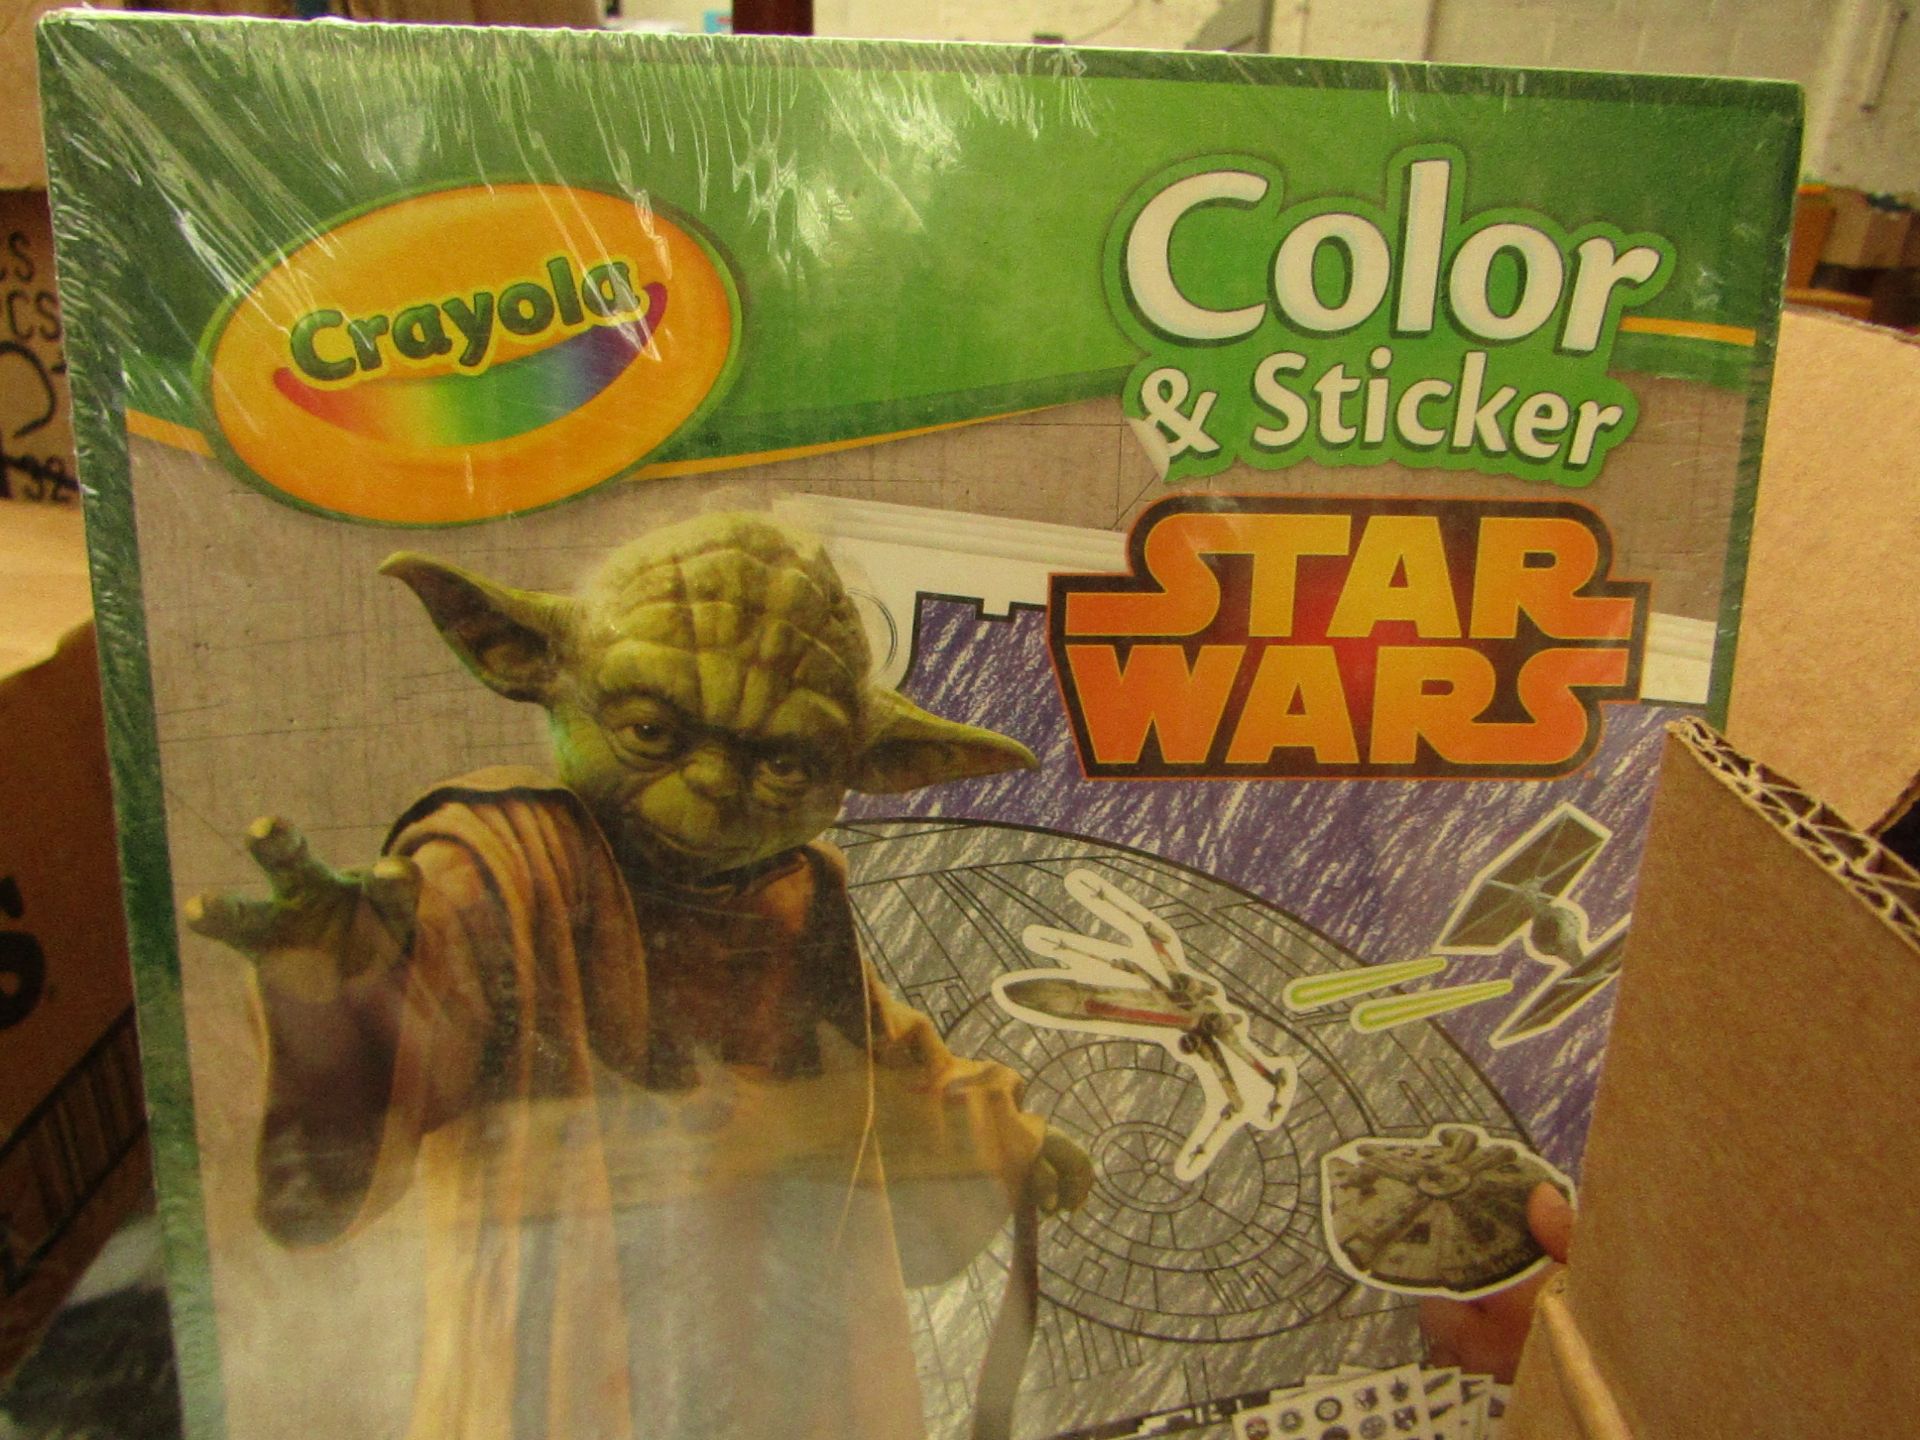 12 x Crayola Color & Sticker Star wars sets. New & Packaged